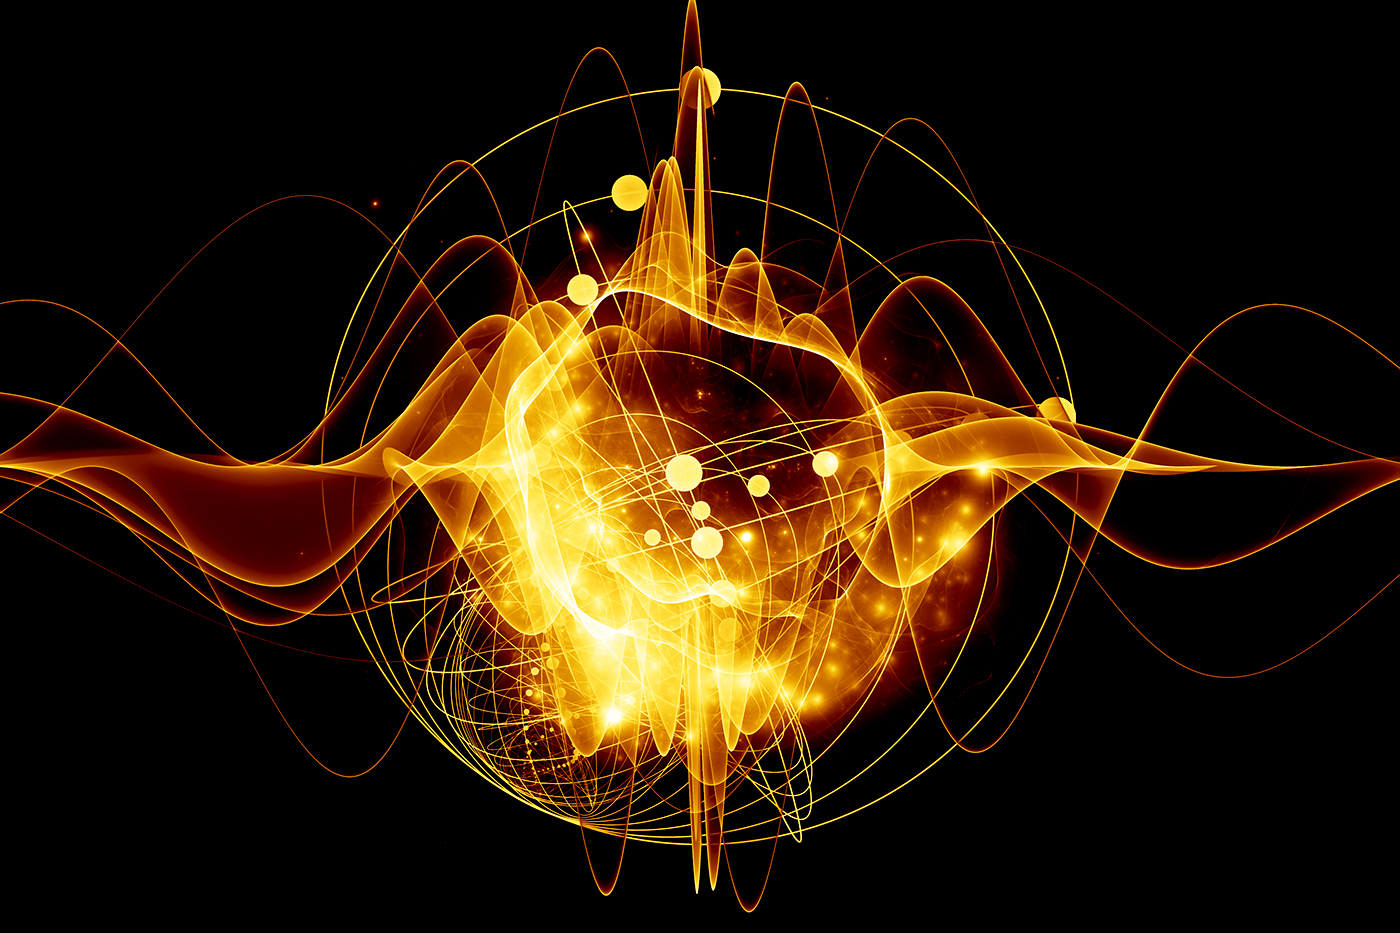 digital representation of an atom and quantum waves illustrated with fractal elements